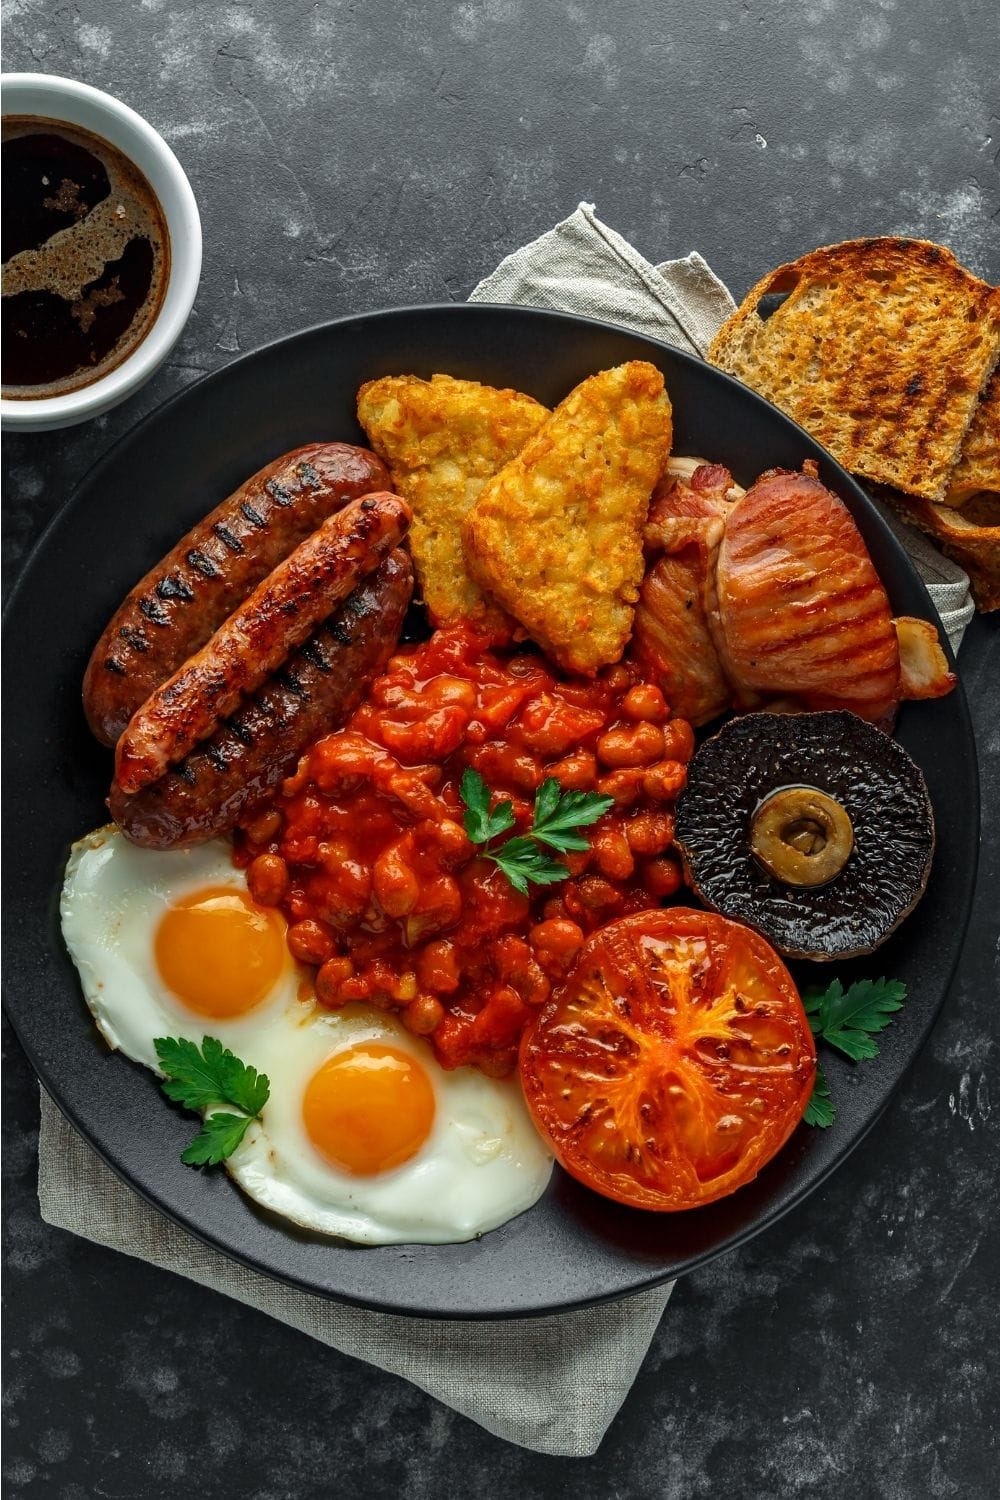 Full Irish Breakfast: Sausage, Hash Browns, Egg, Bacon, and Chickpeas